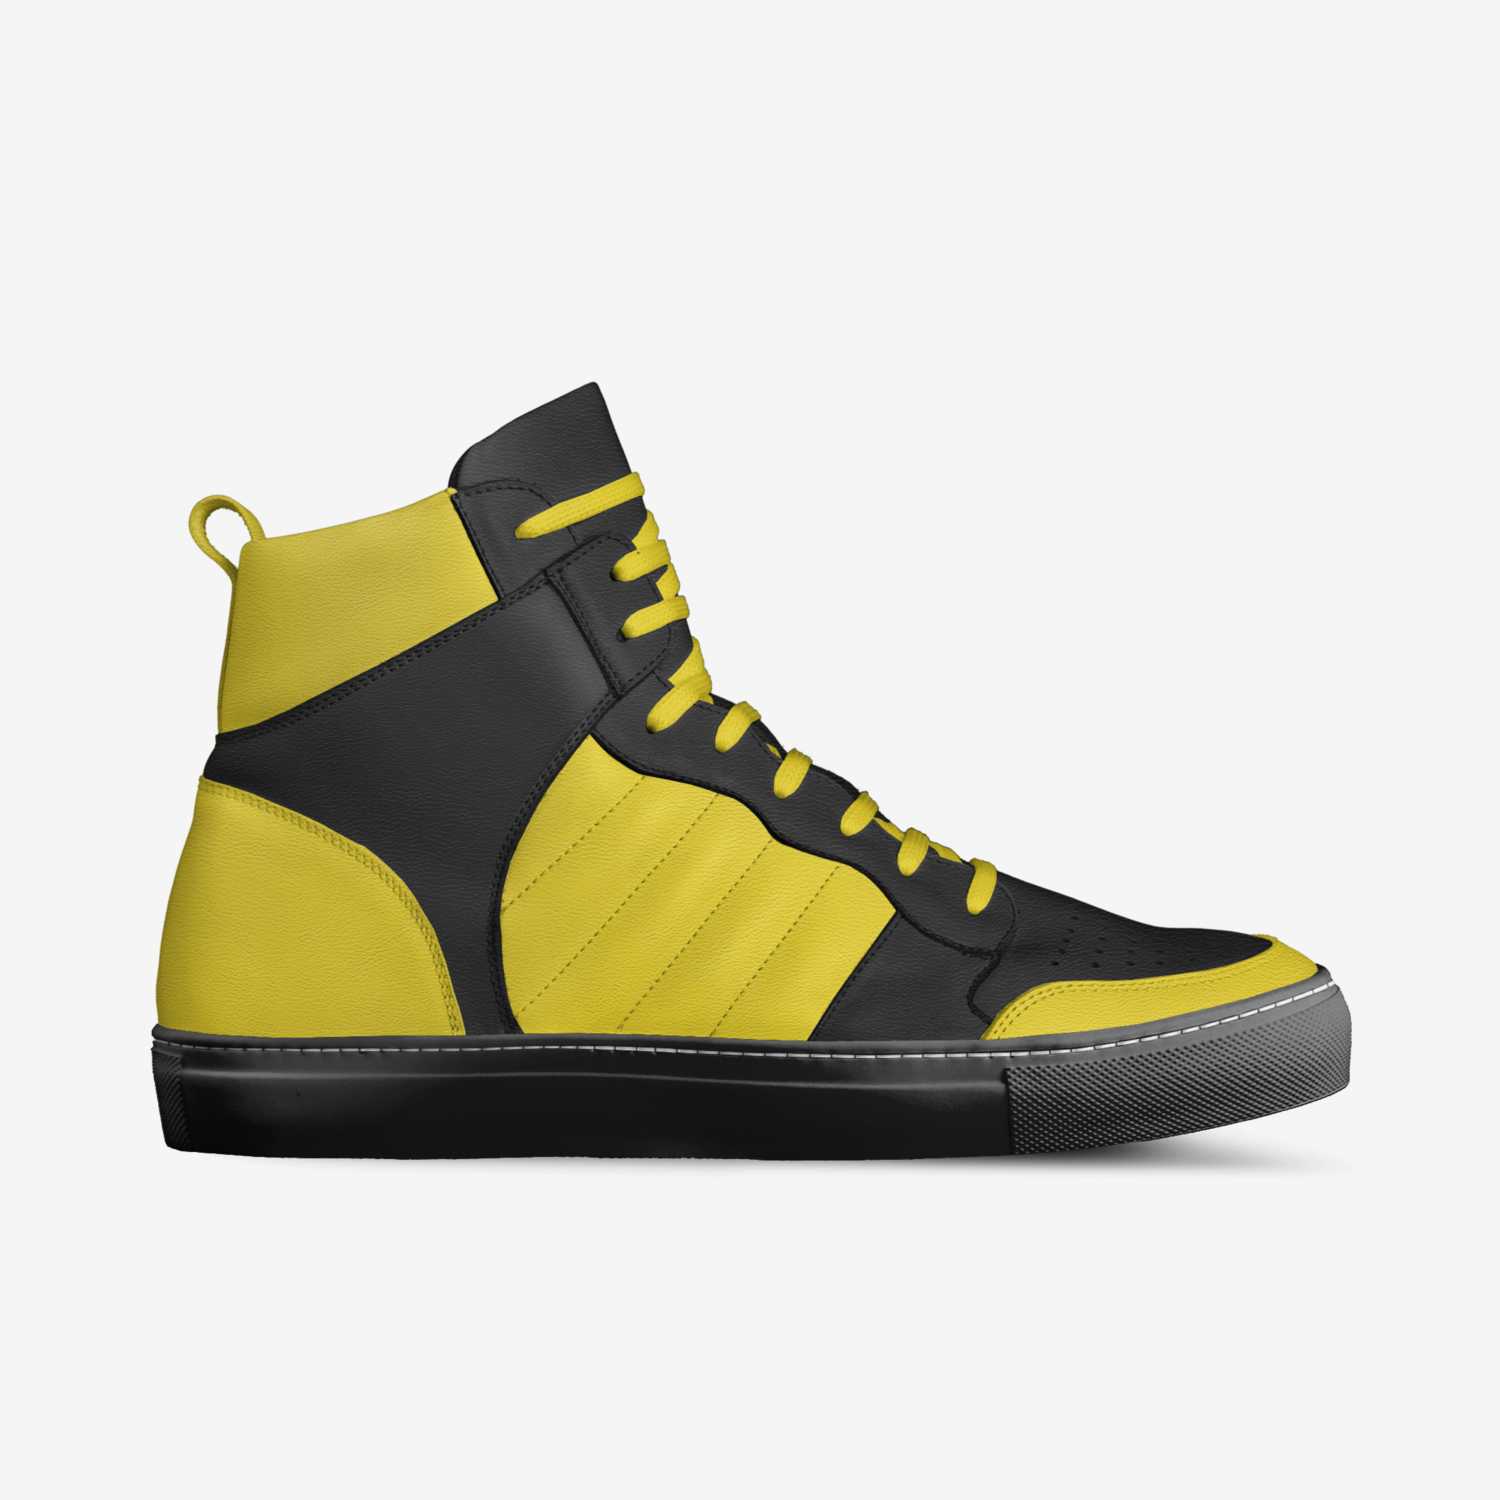 black and yellow custom made in Italy shoes by Ethan Parker | Side view